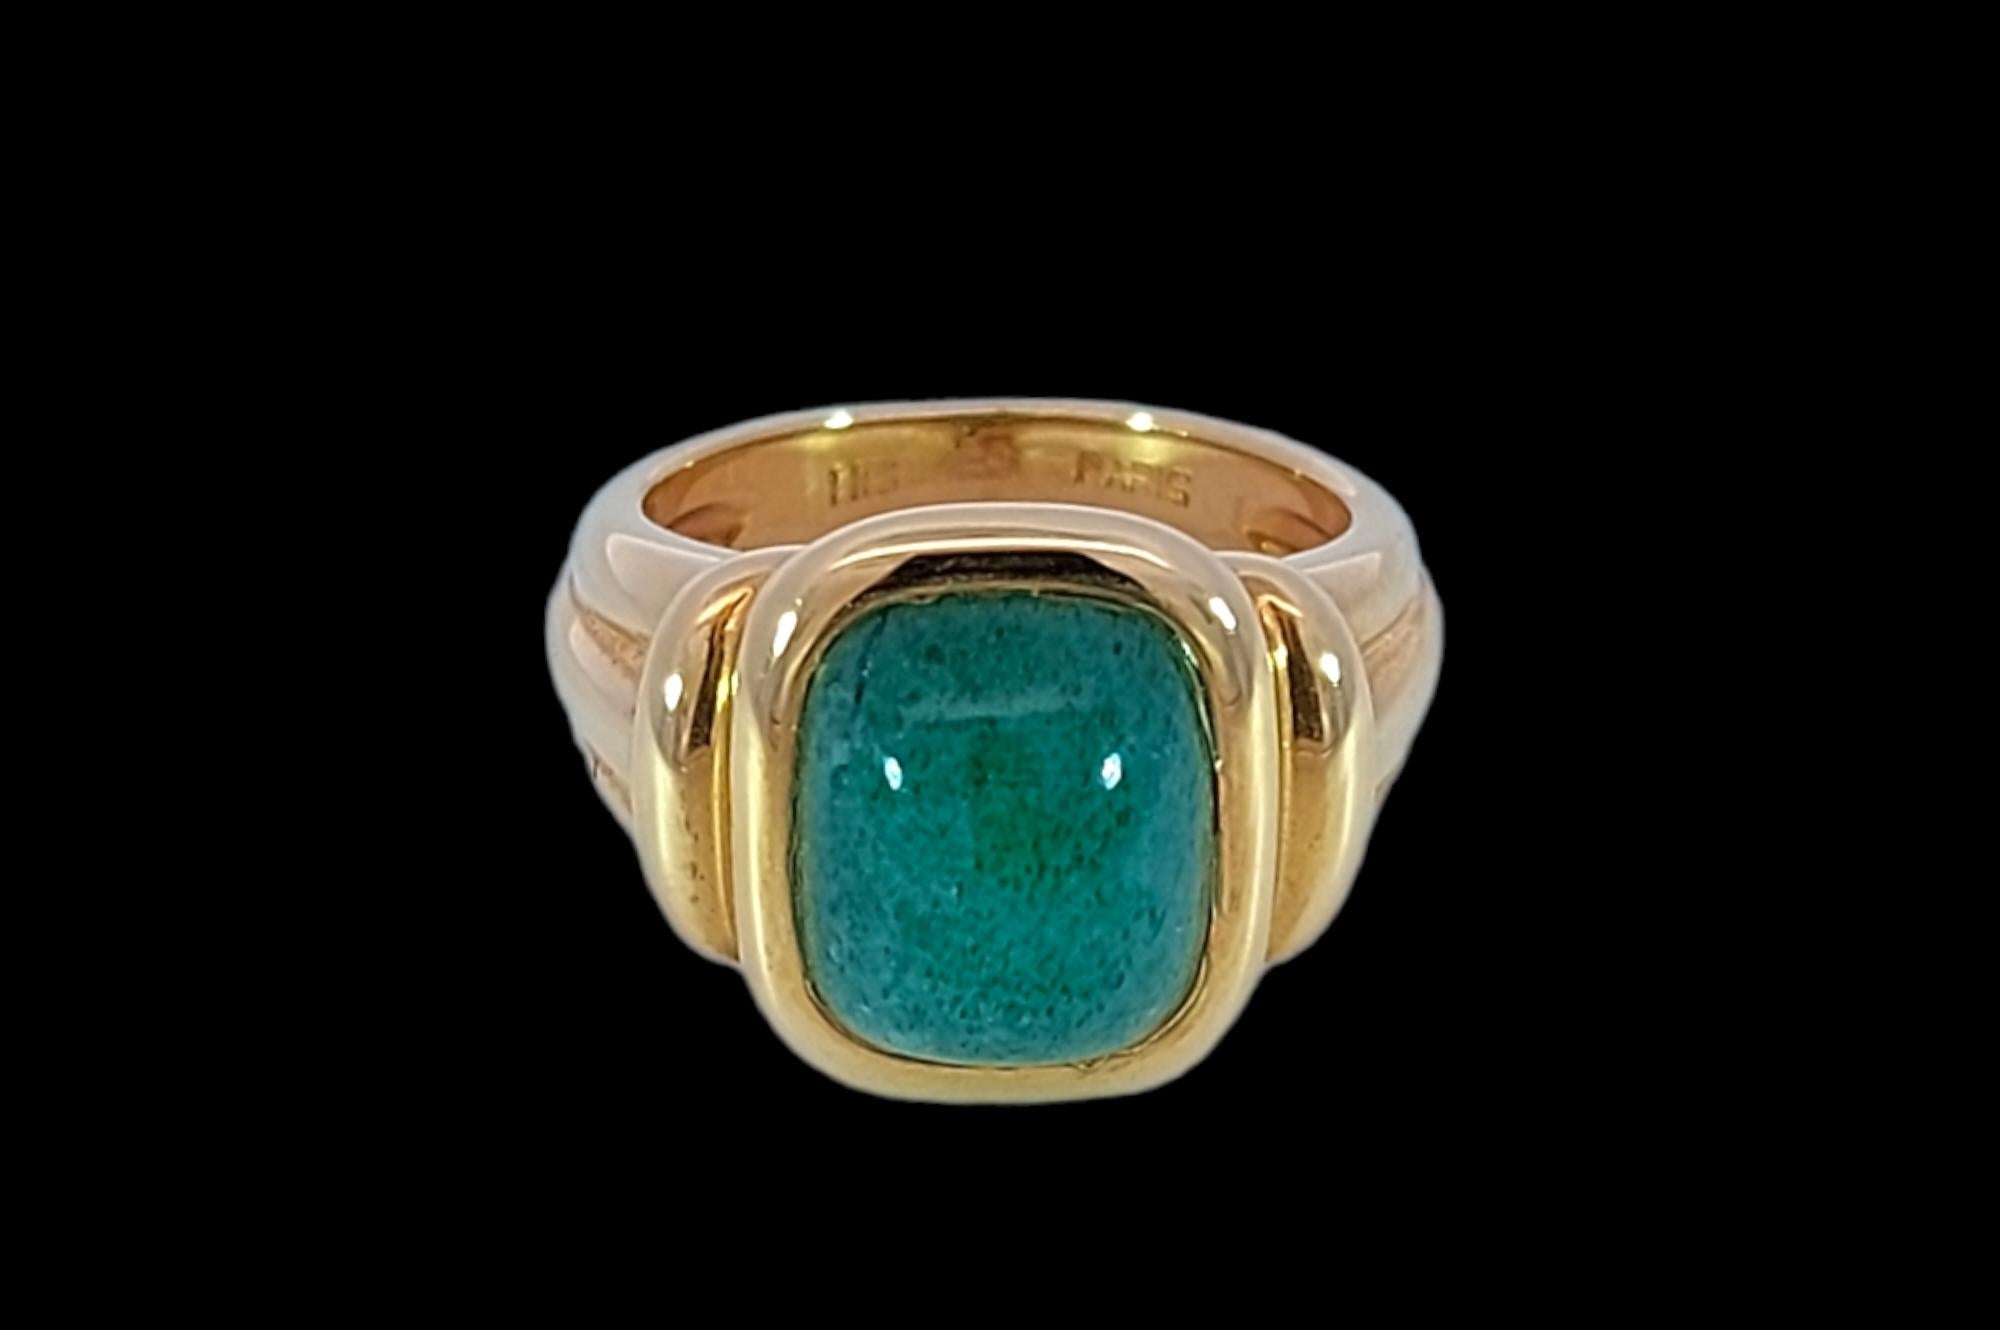 Hermès Paris 18kt Yellow Gold Ring with Cabochon Jade Stone

Jade: Green Cabochon Jade stone 9.1 mm x 11.5 mm

Material: 18kt Yellow gold

Ring size: 52 EU / 6 US ( Can be resized for free)

Total weight: 12.4 gram / 0.440 oz / 8 dwt